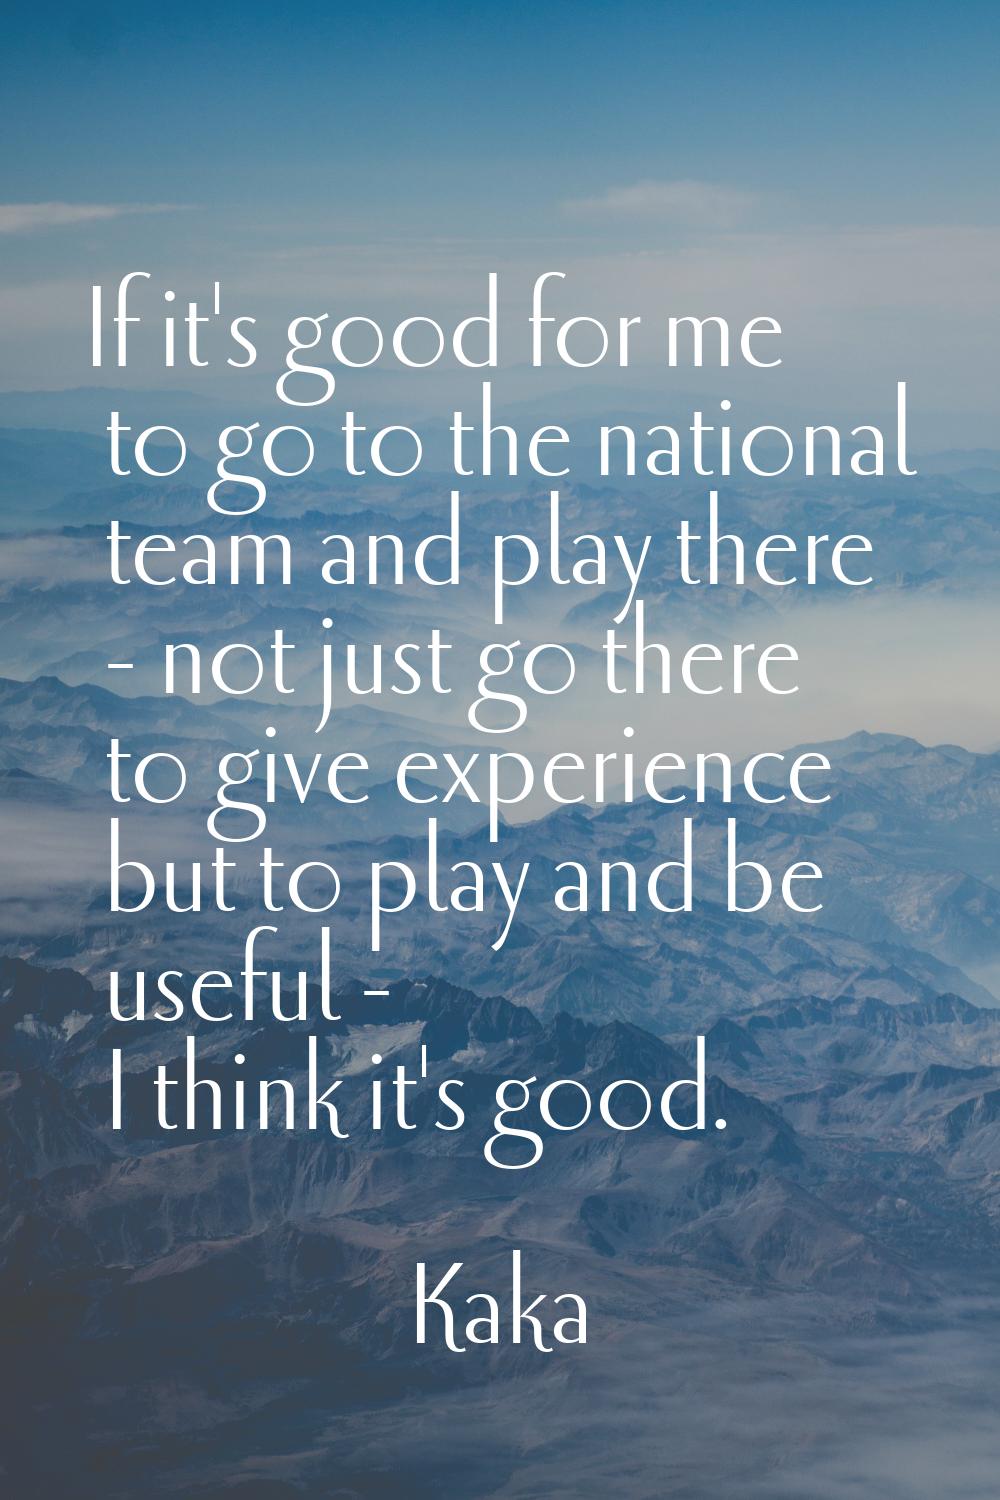 If it's good for me to go to the national team and play there - not just go there to give experienc